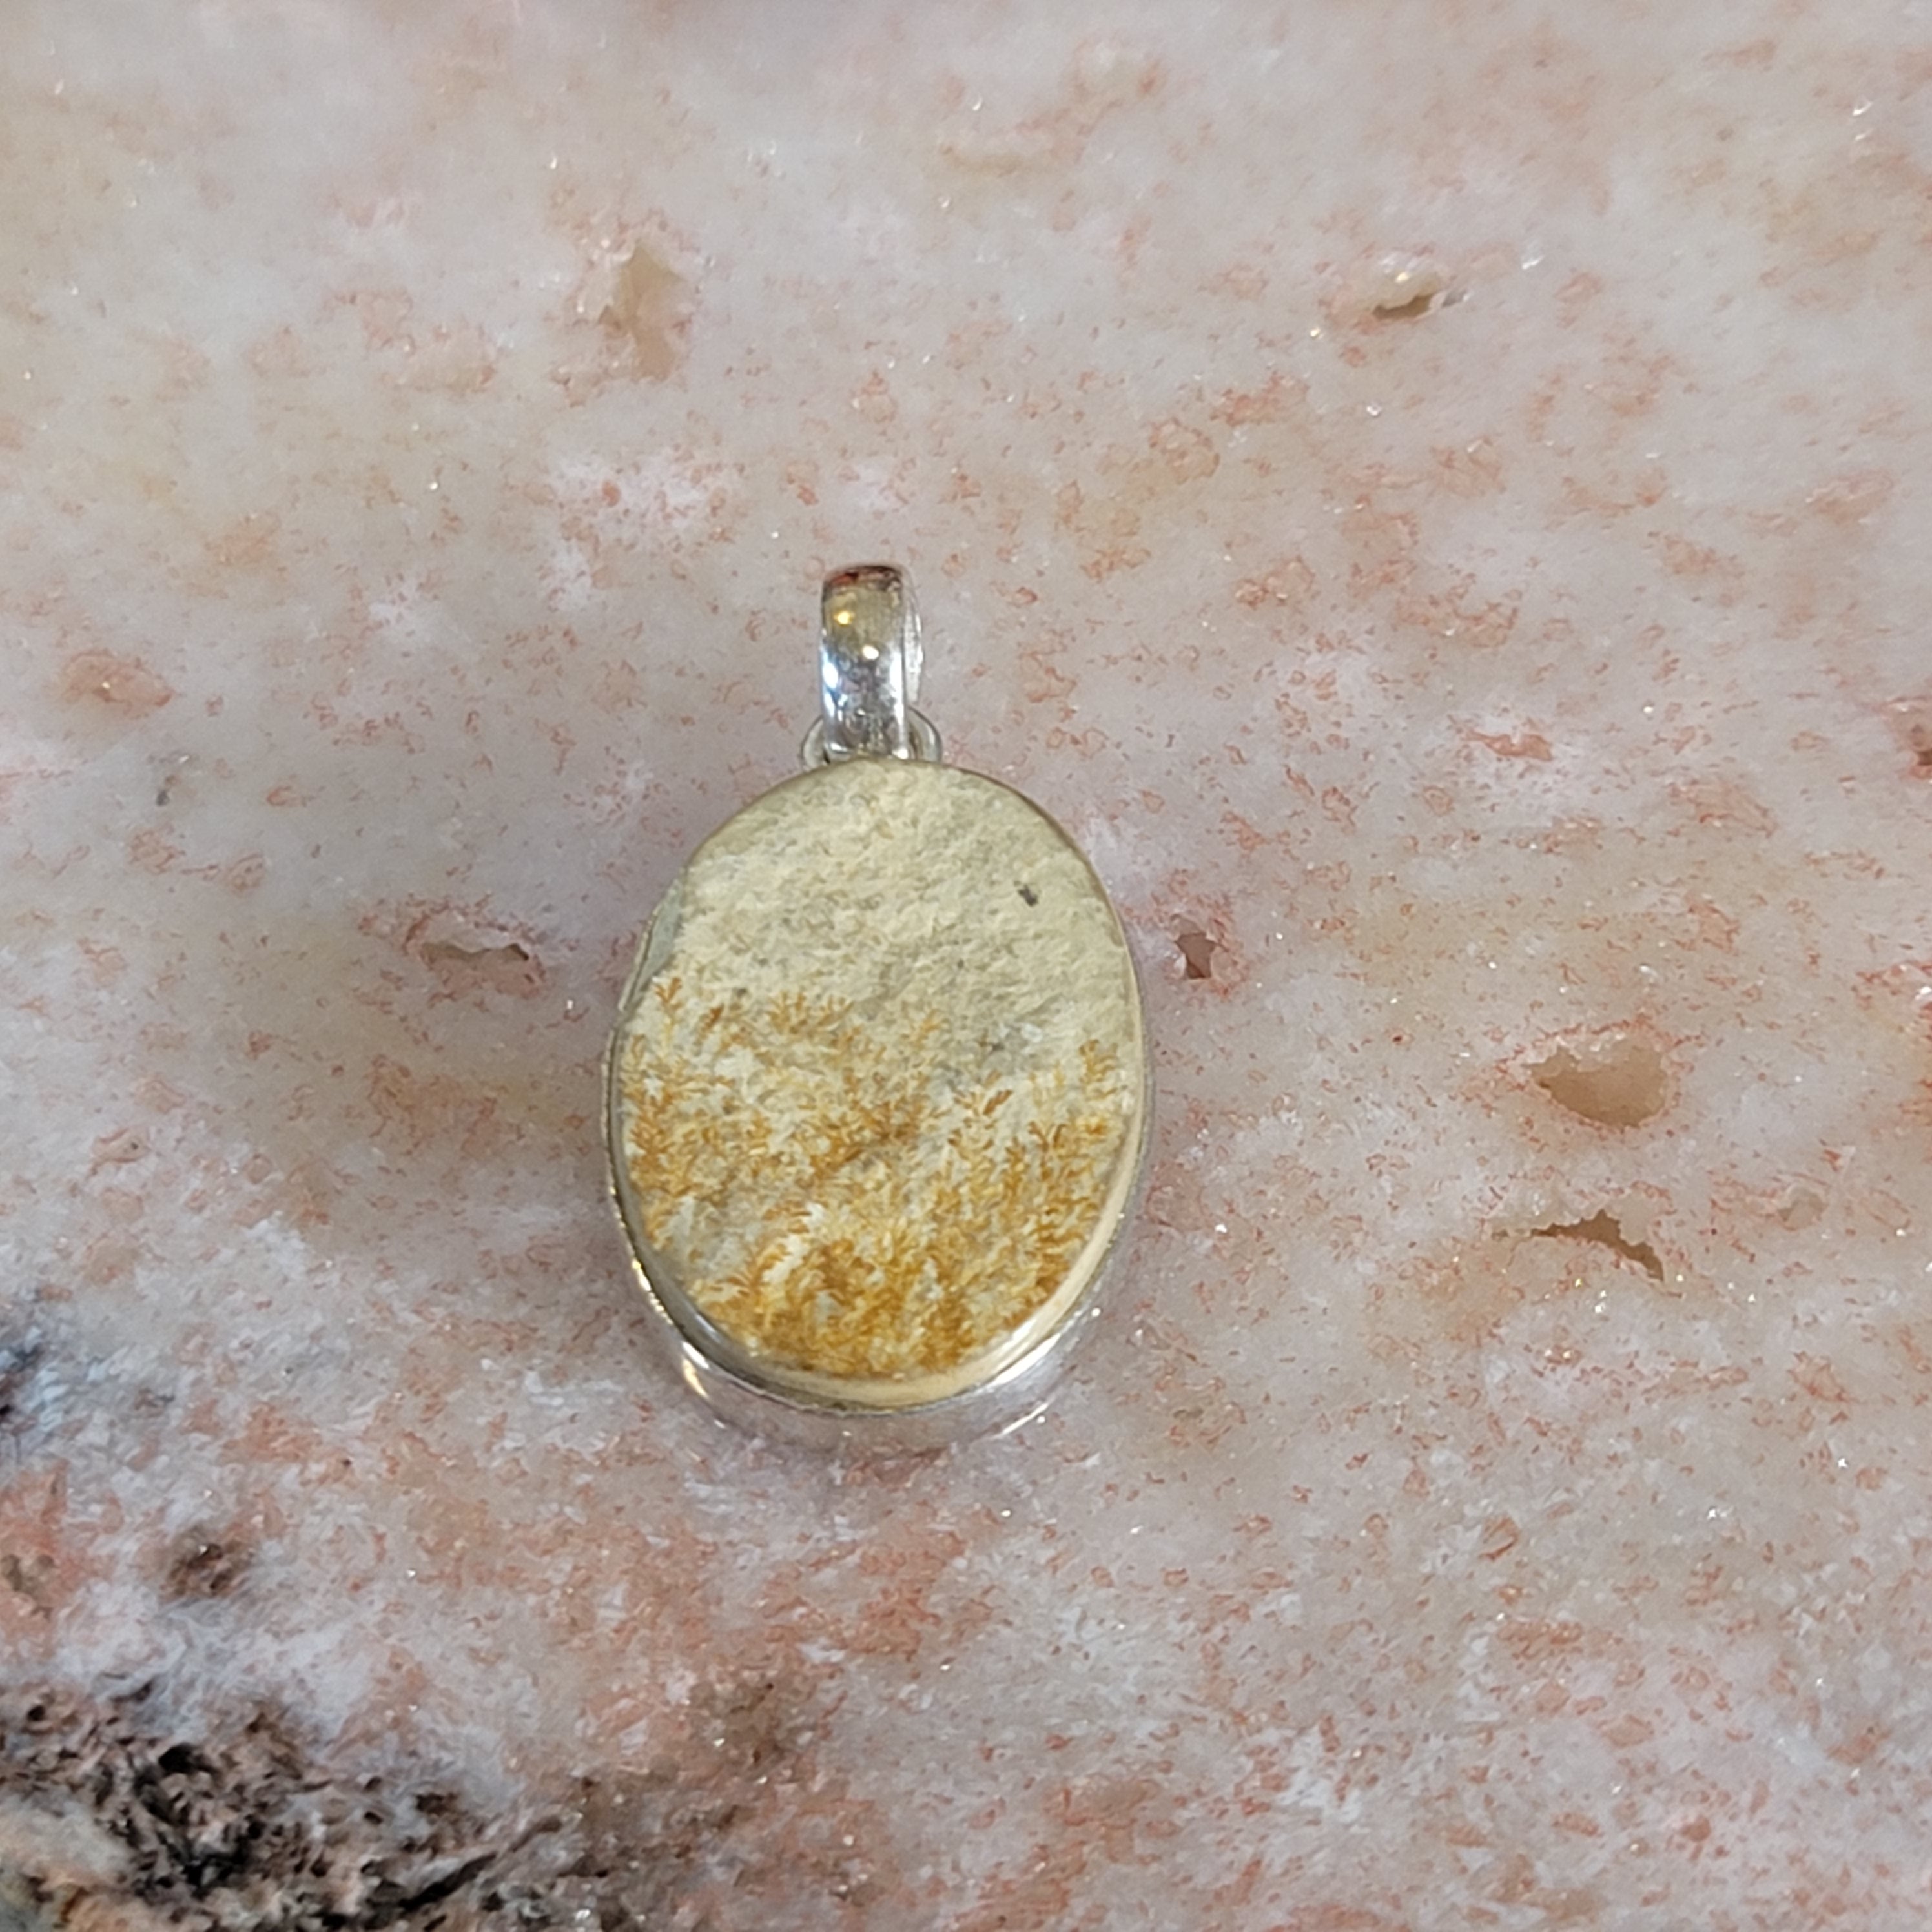 Dendritic Sandstone Pendant .925 Silver for Focus and Meditation